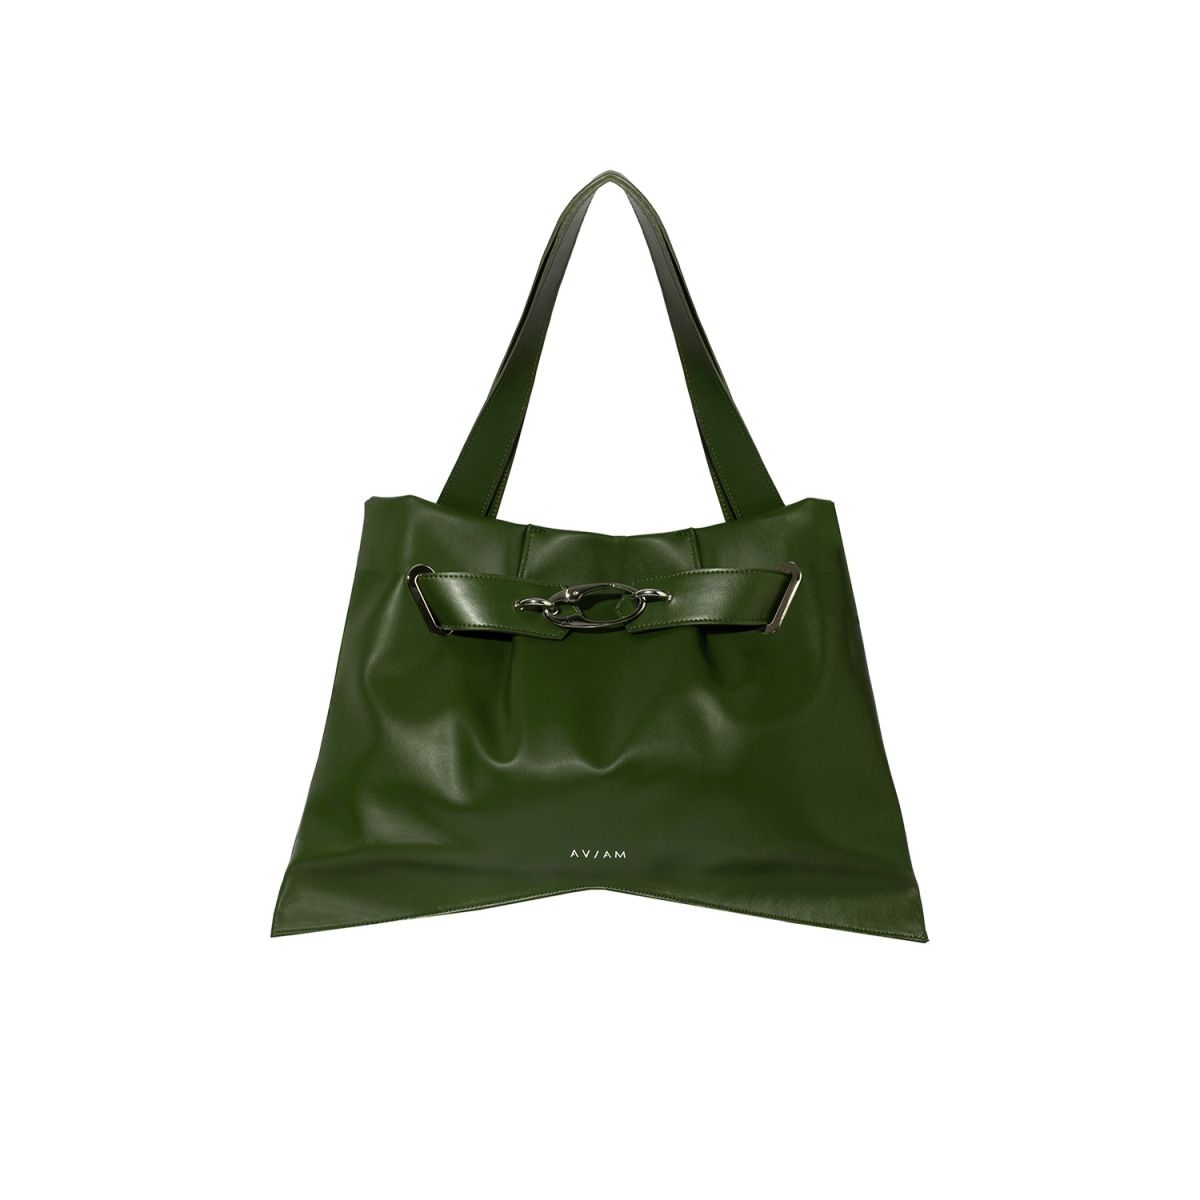 Cactus Leather Bag - The Mhobo Green | Wolf & Badger (US)